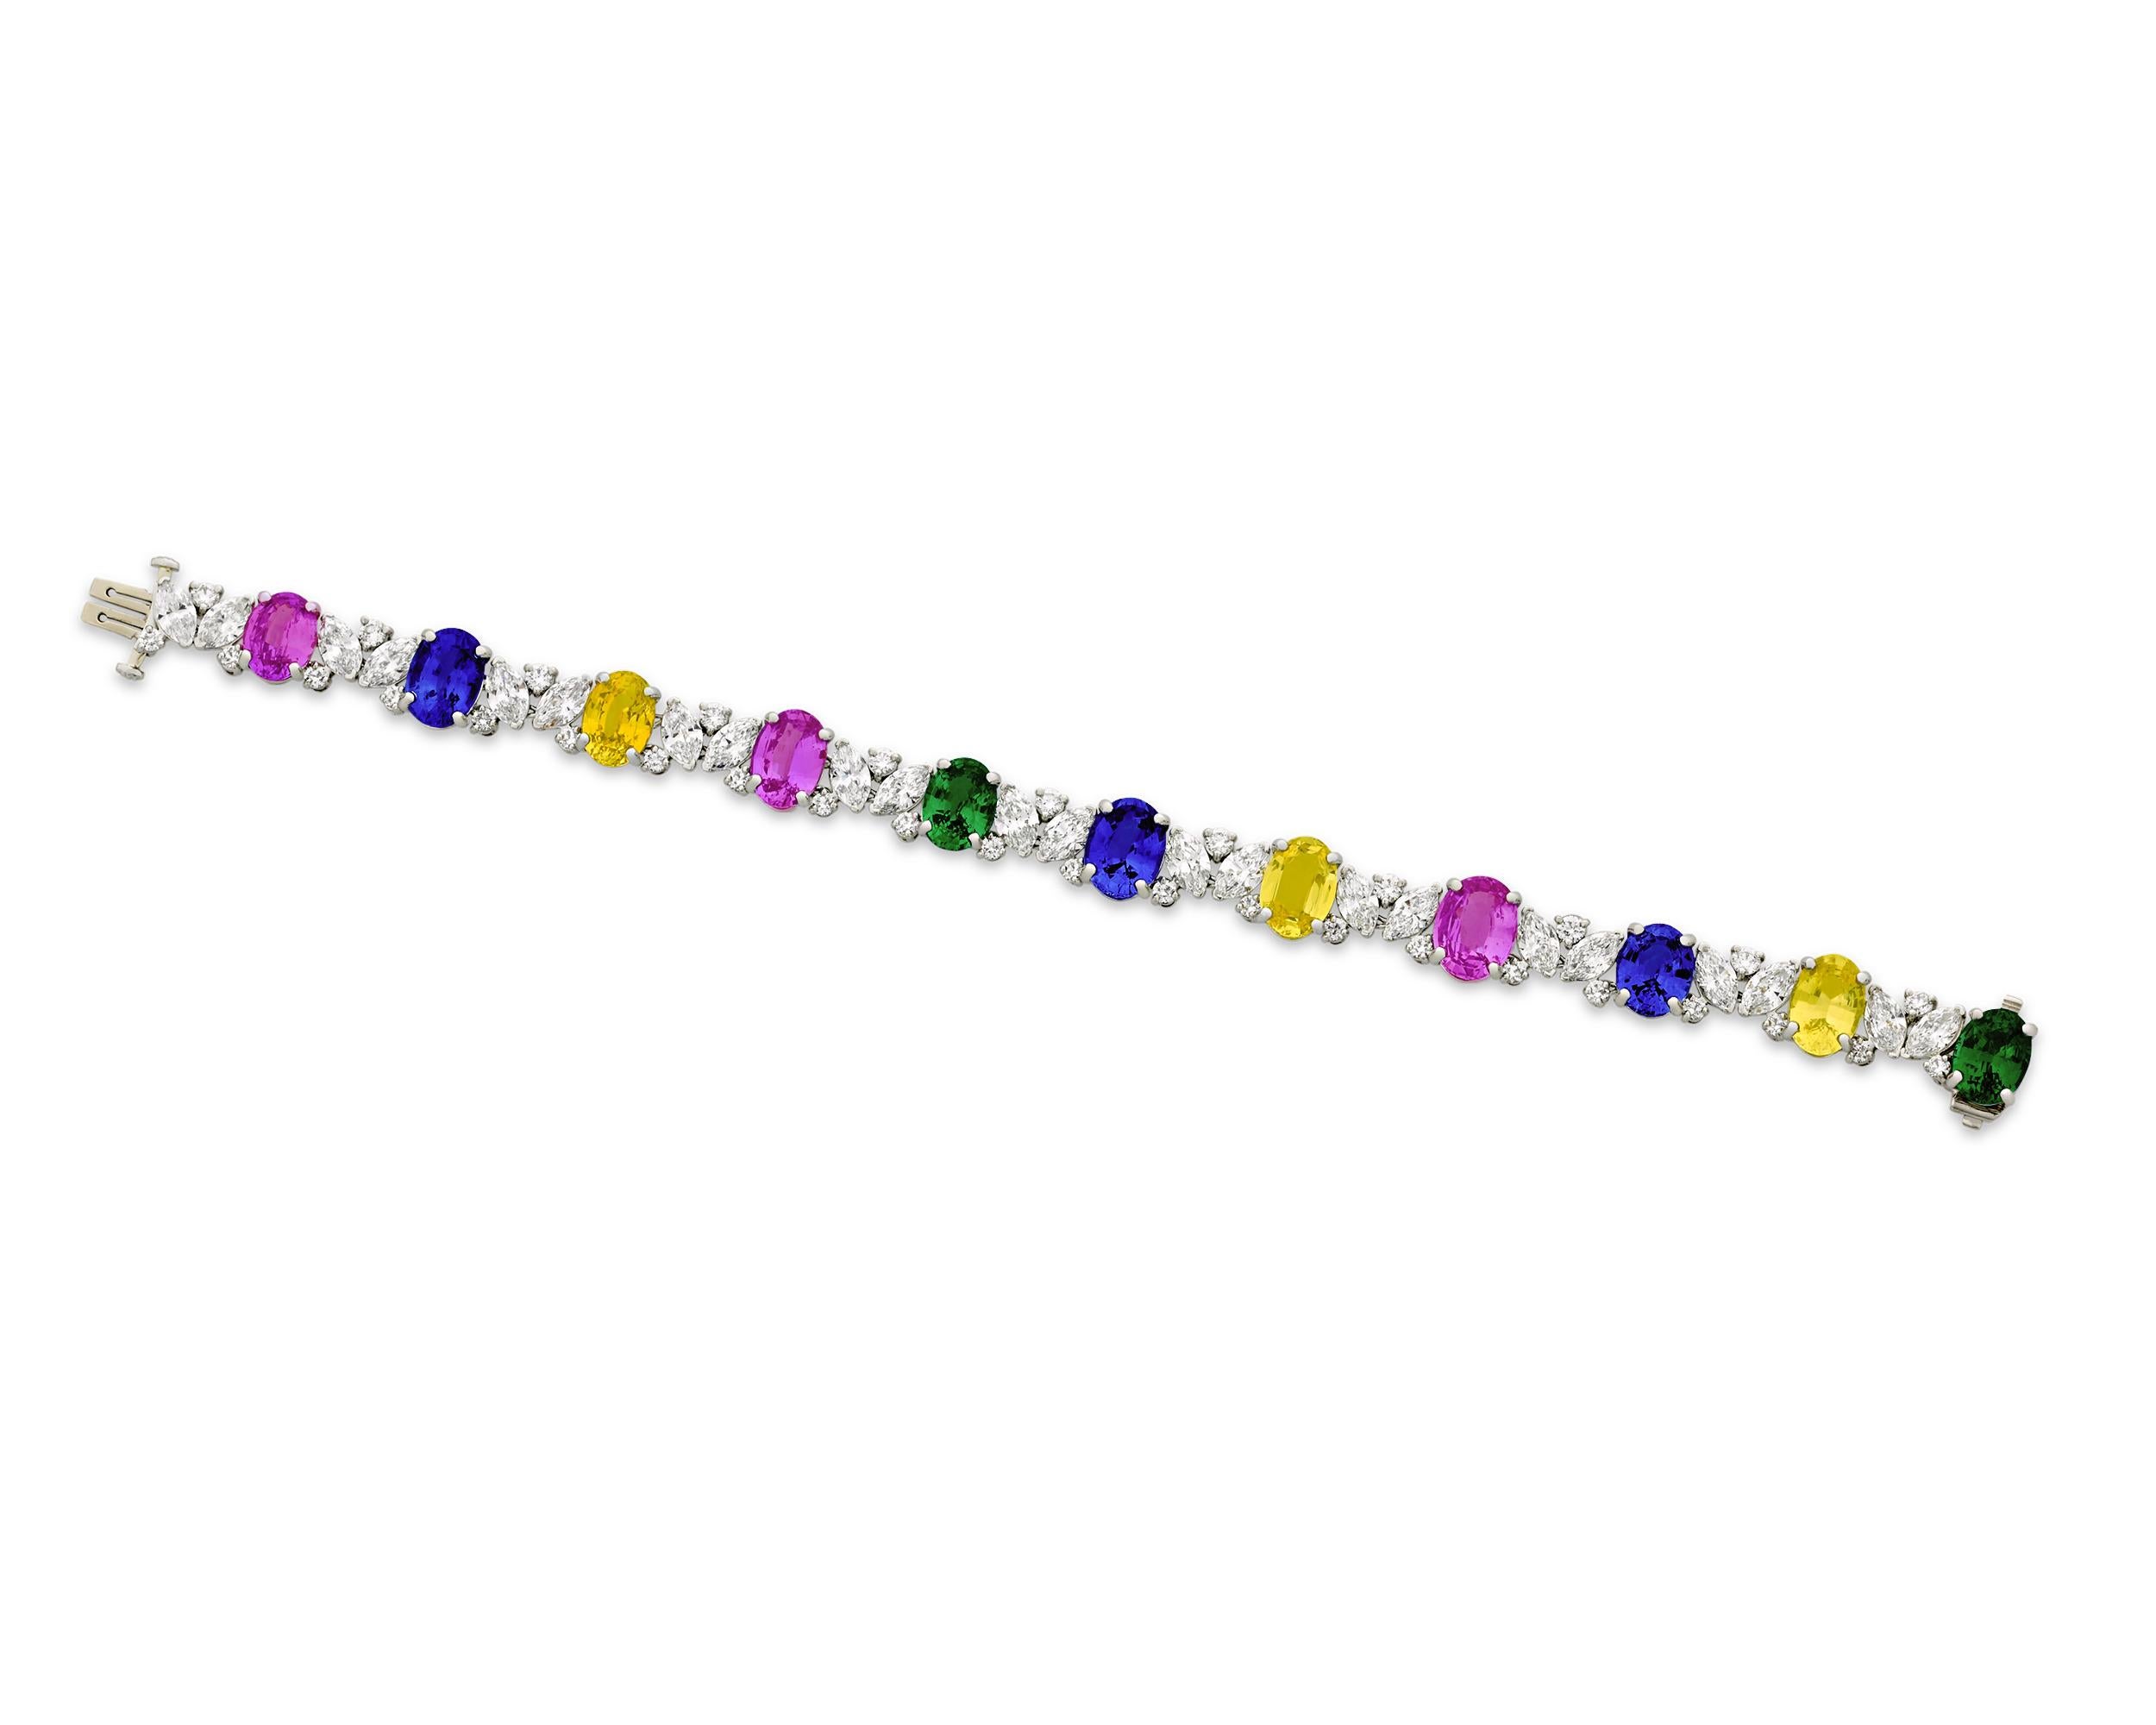 Sapphires and tsavorites ranging in color from blue to pink, purple and yellow present a sparkling rainbow of hues in this statement bracelet. With over 20.00 carats of sapphires and nearly 5.00 carats of tsavorites, the exquisite craftsmanship